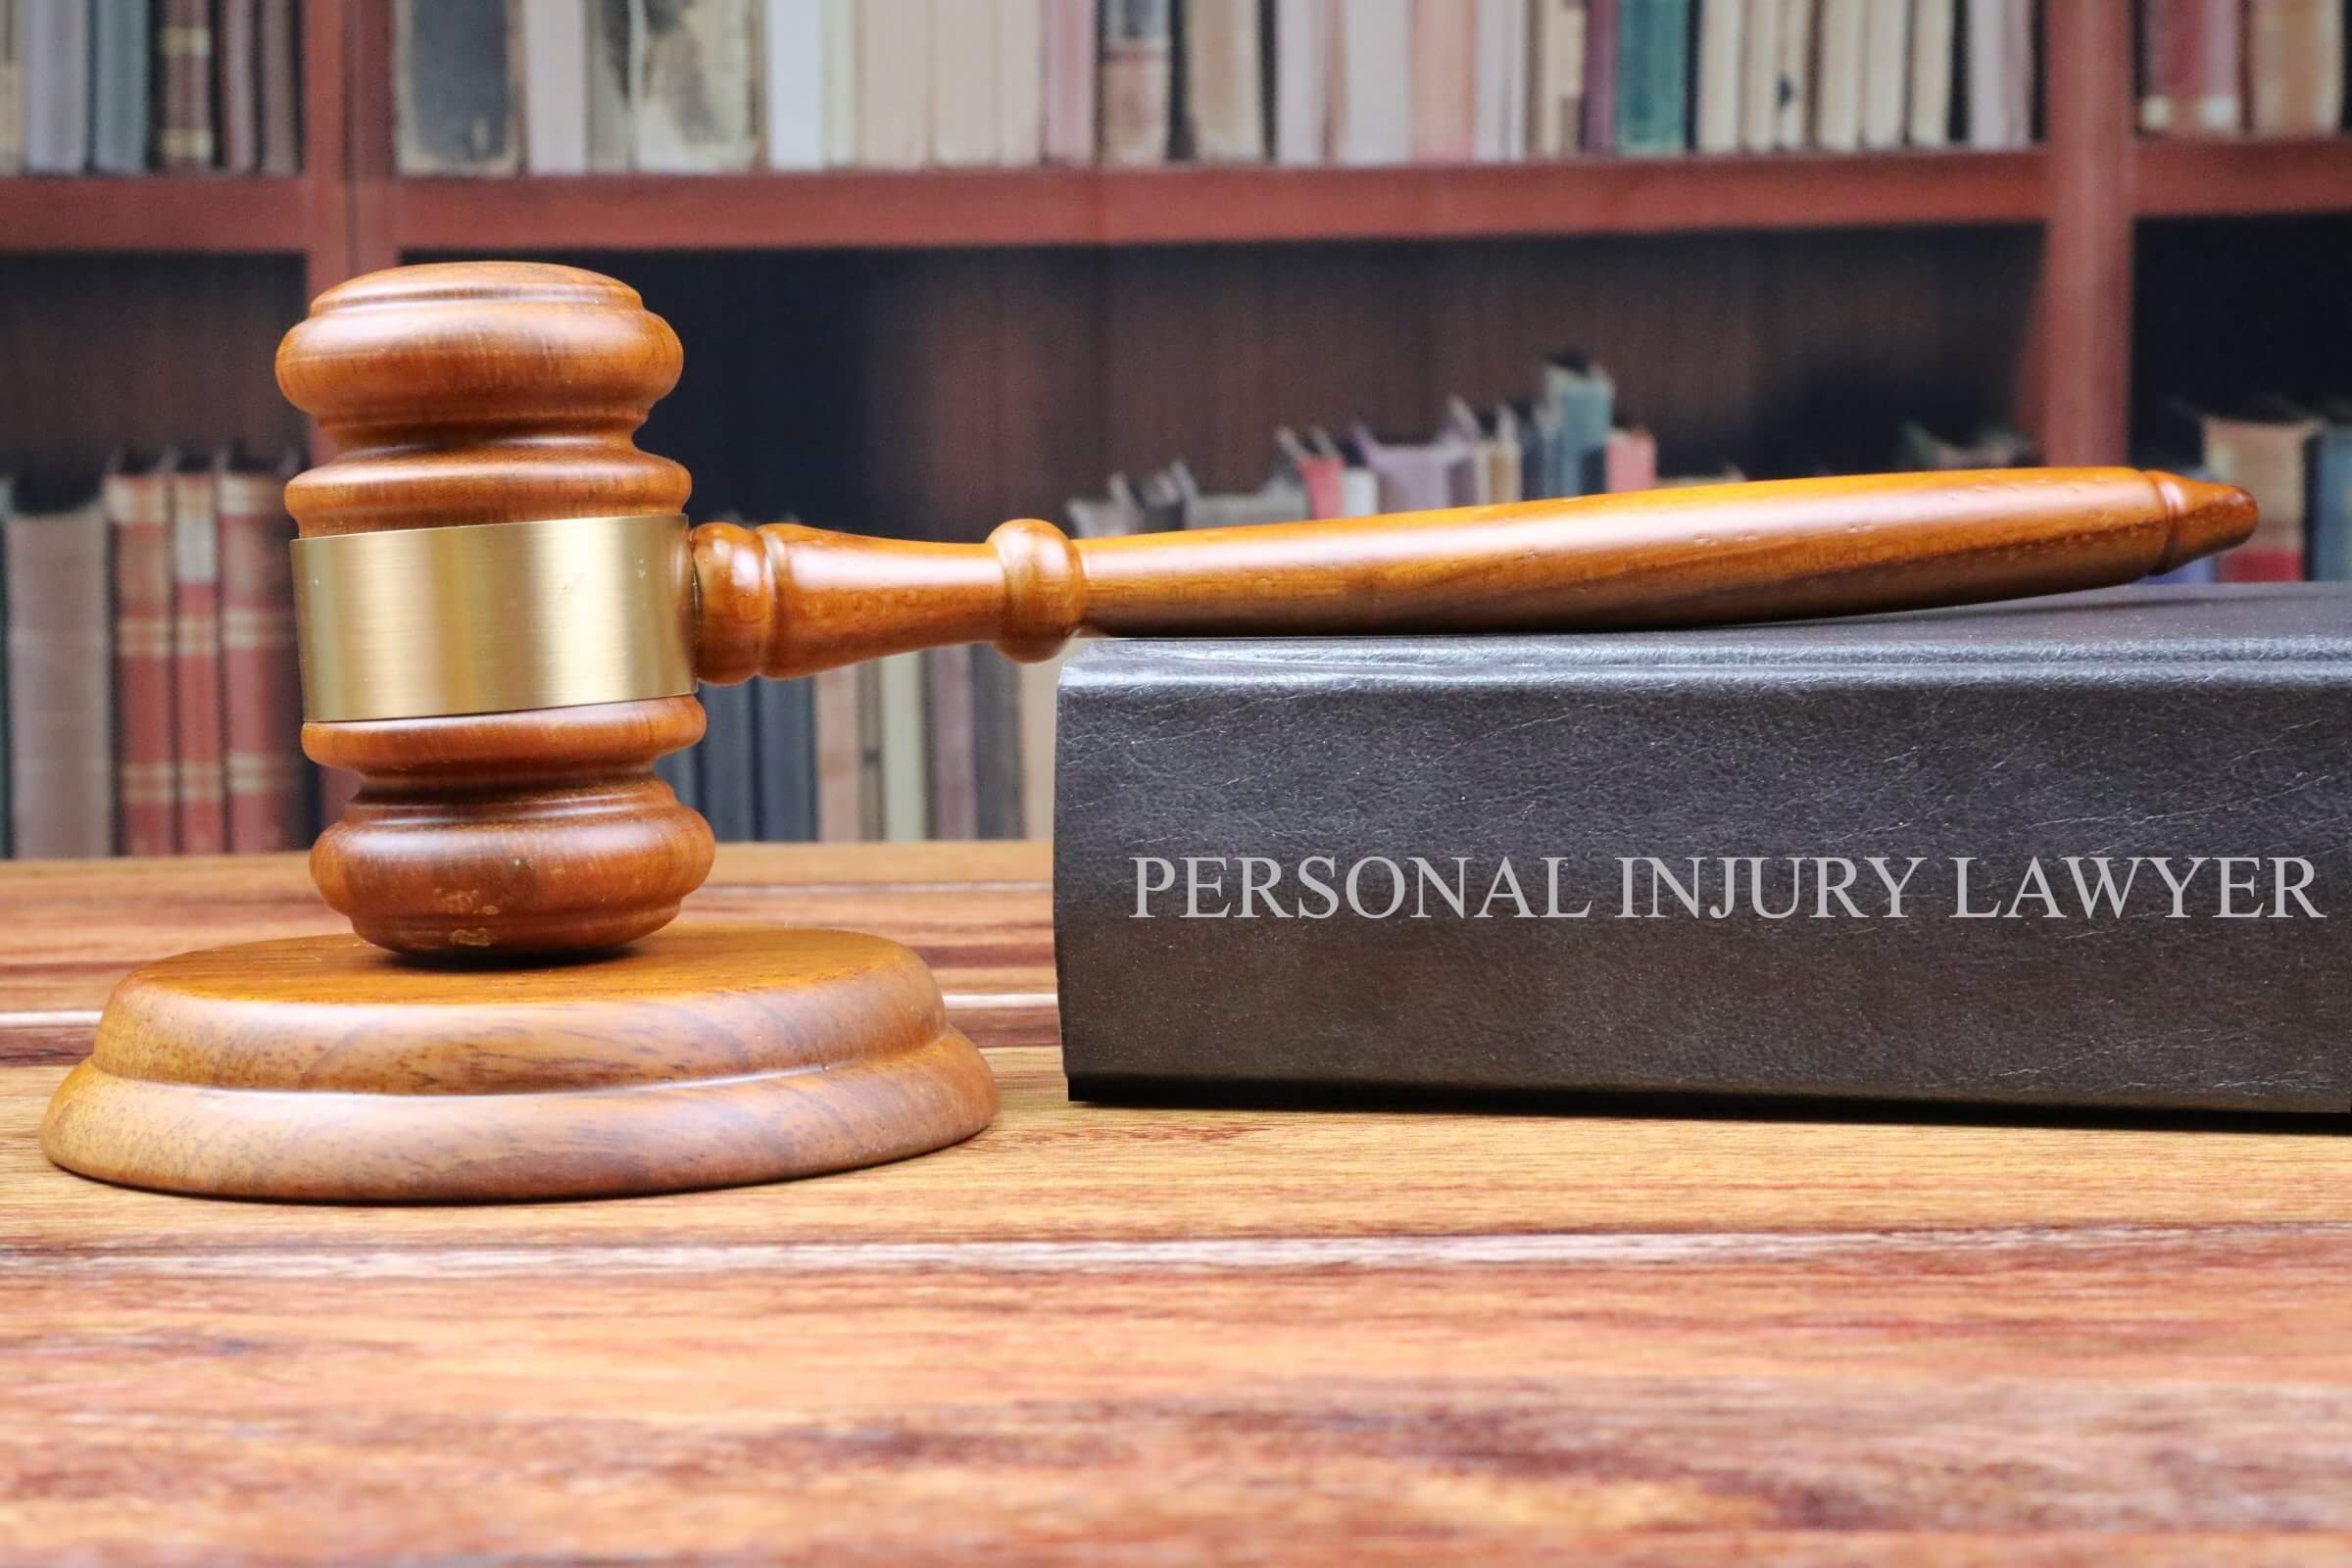 Best Personal Injury Lawyer in South Bend, Indiana